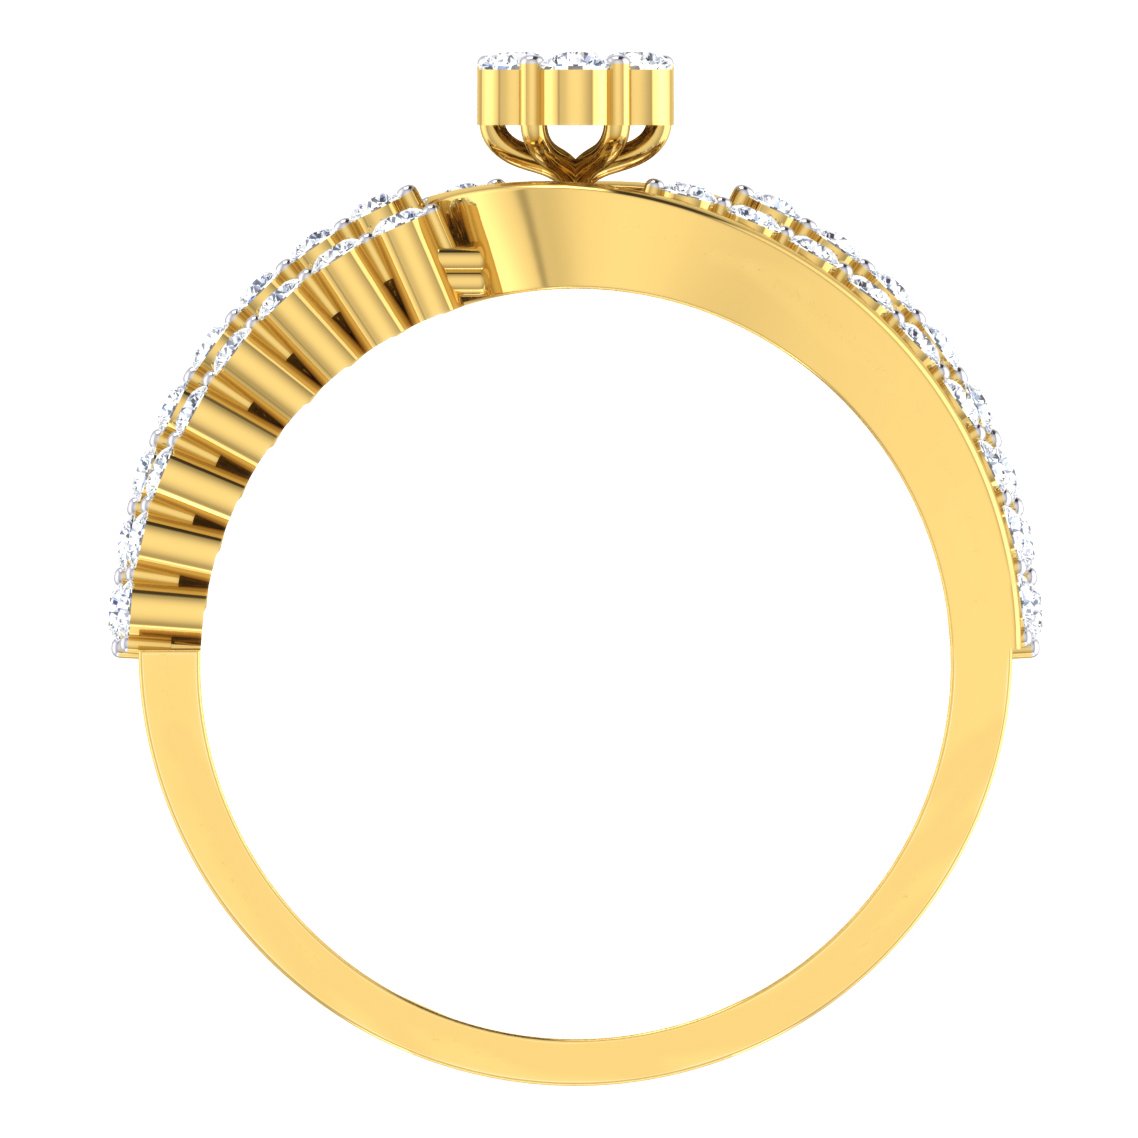 Universal Love Diamond Ring In Pure Gold By Dhanji Jewels